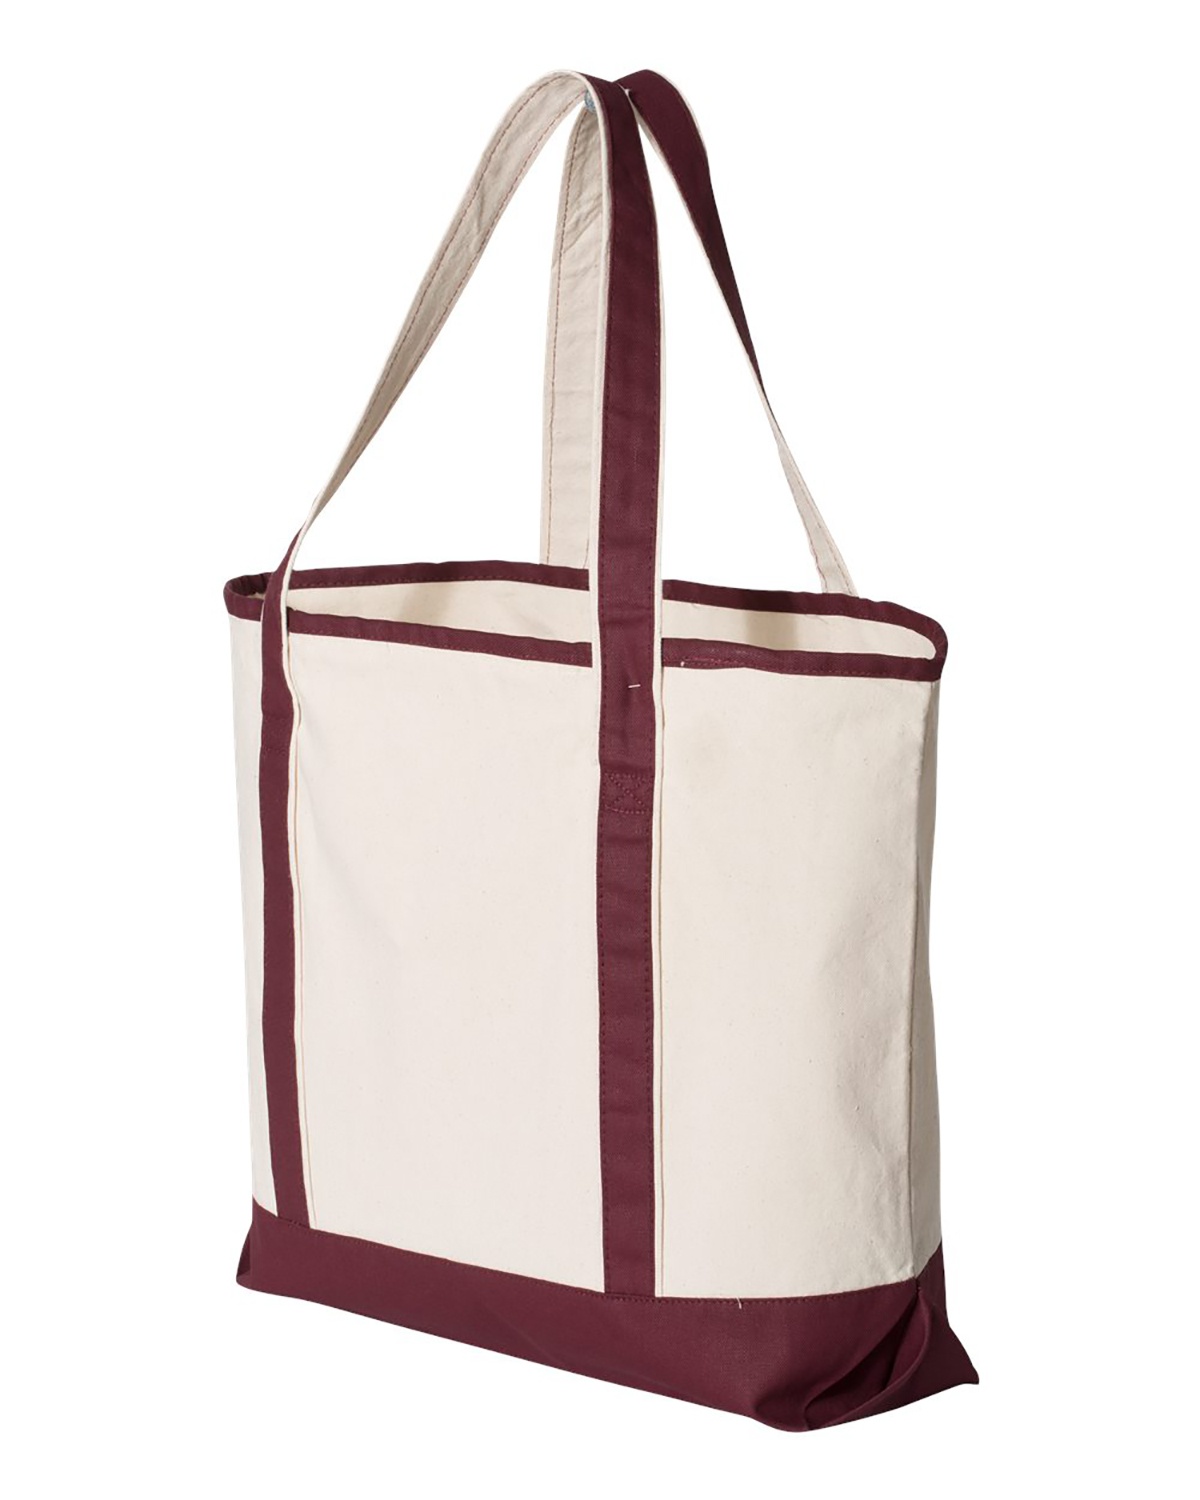 'Q-Tees Q1500 Large Canvas Deluxe Tote'